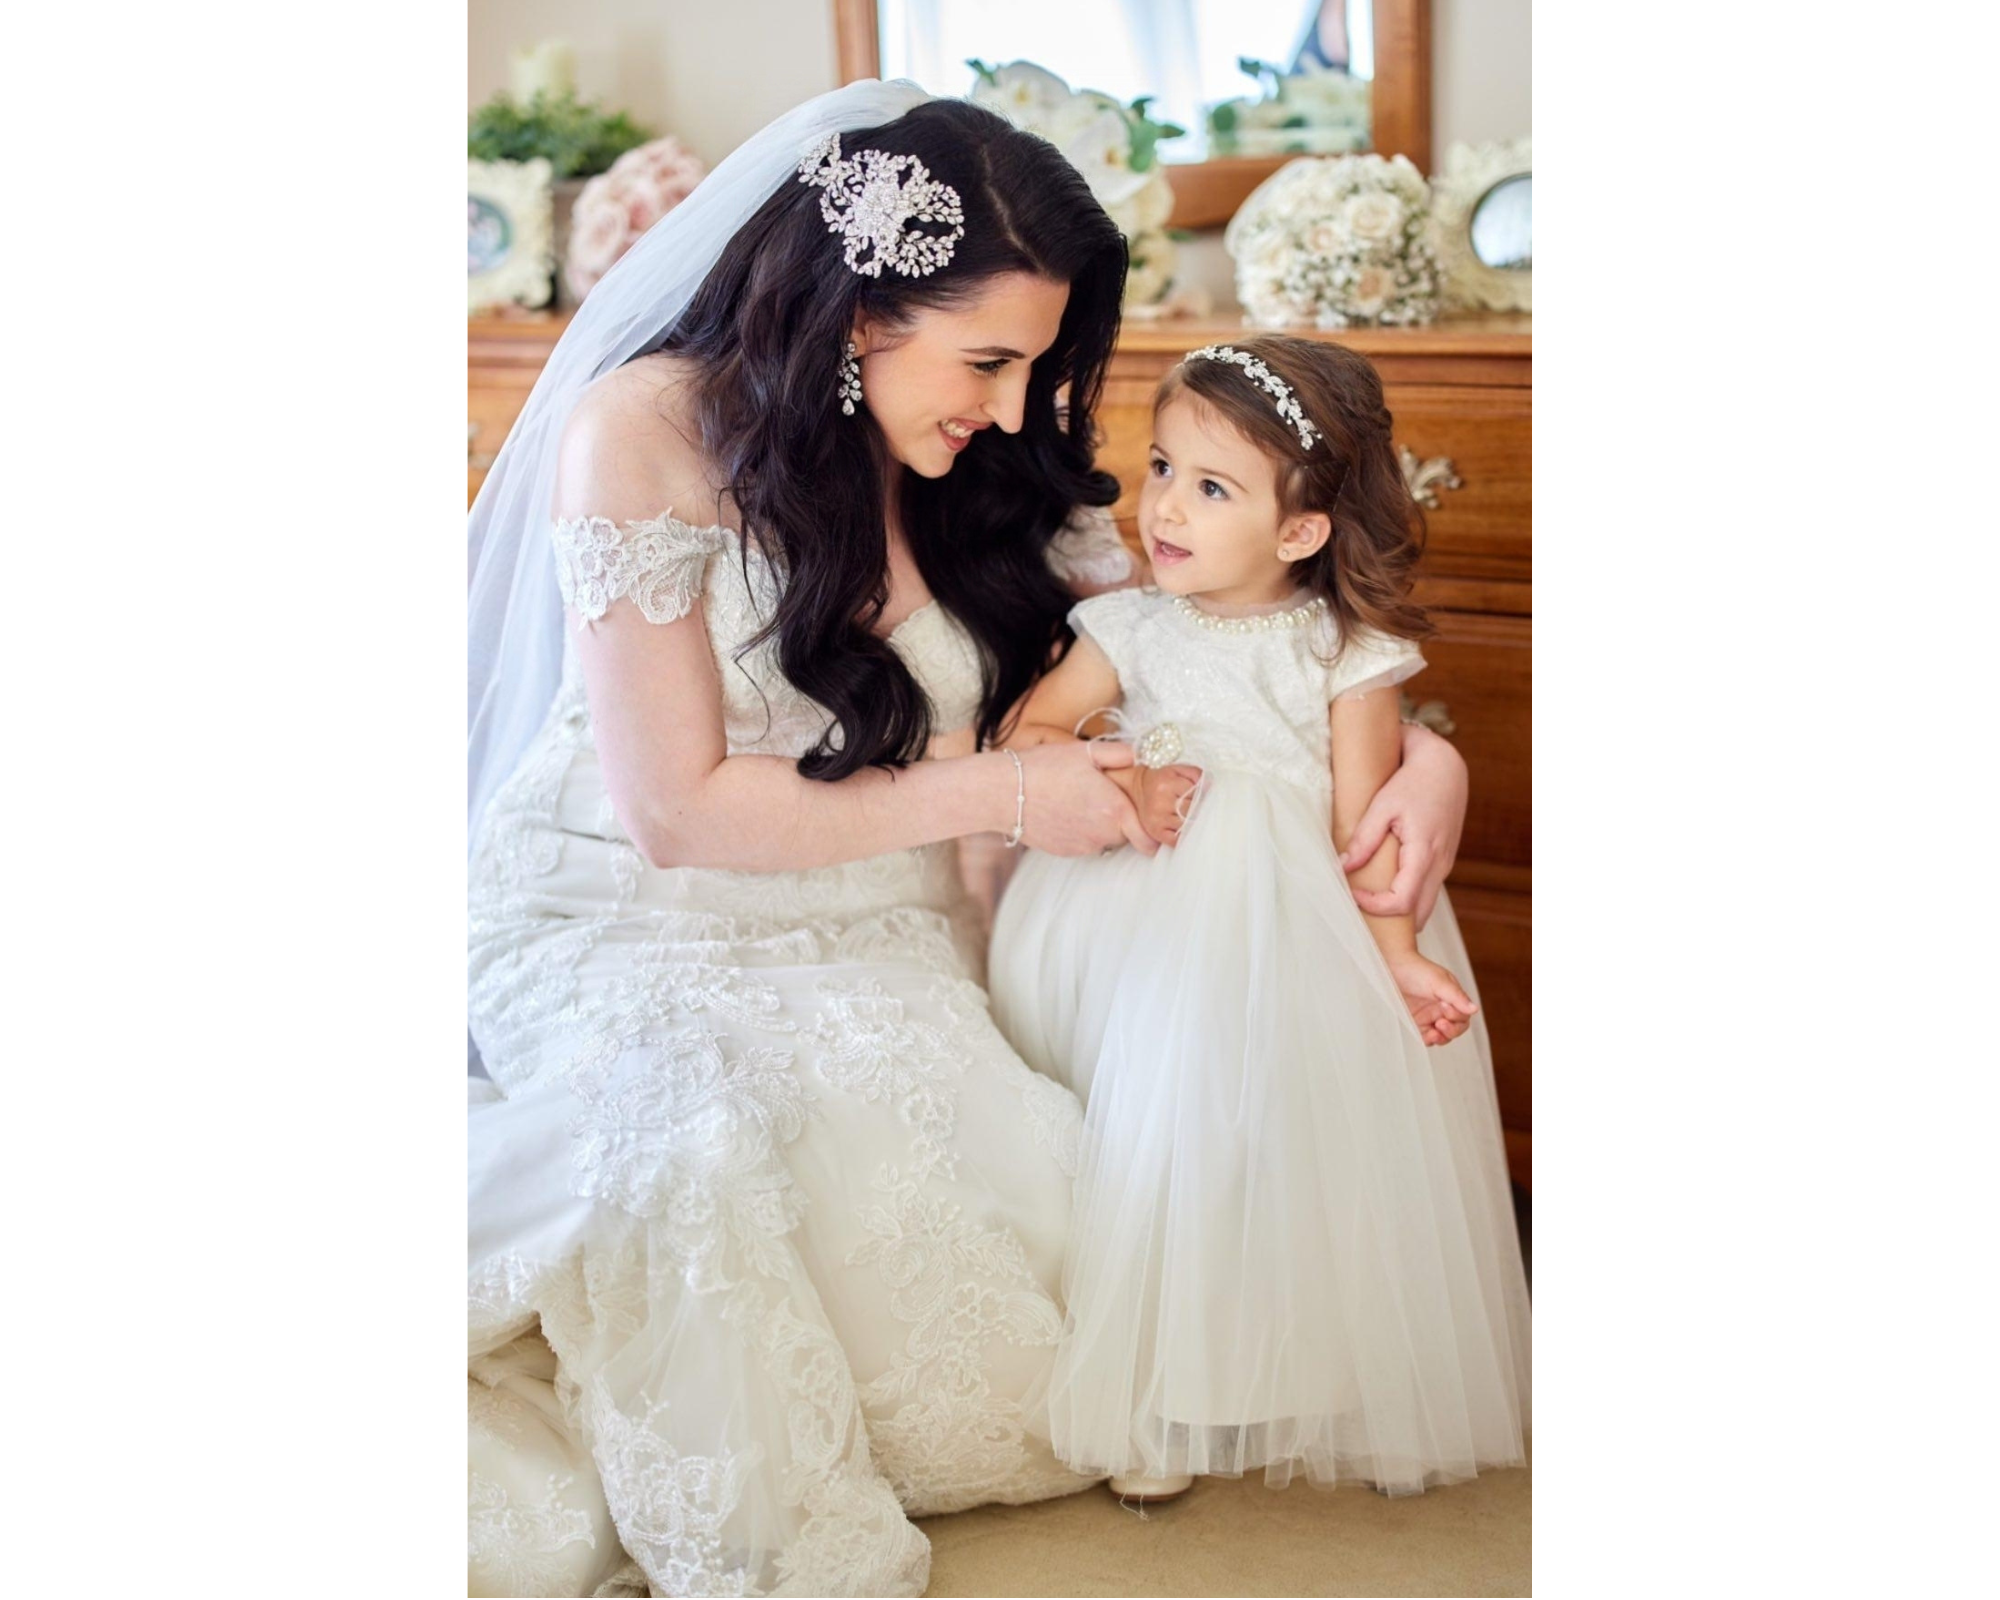 Our elegant Bridal Styles bride with her adorable flowergirl. The bride is wearing her bold Swarovski crystal hairvine, veil, and wedding gown.